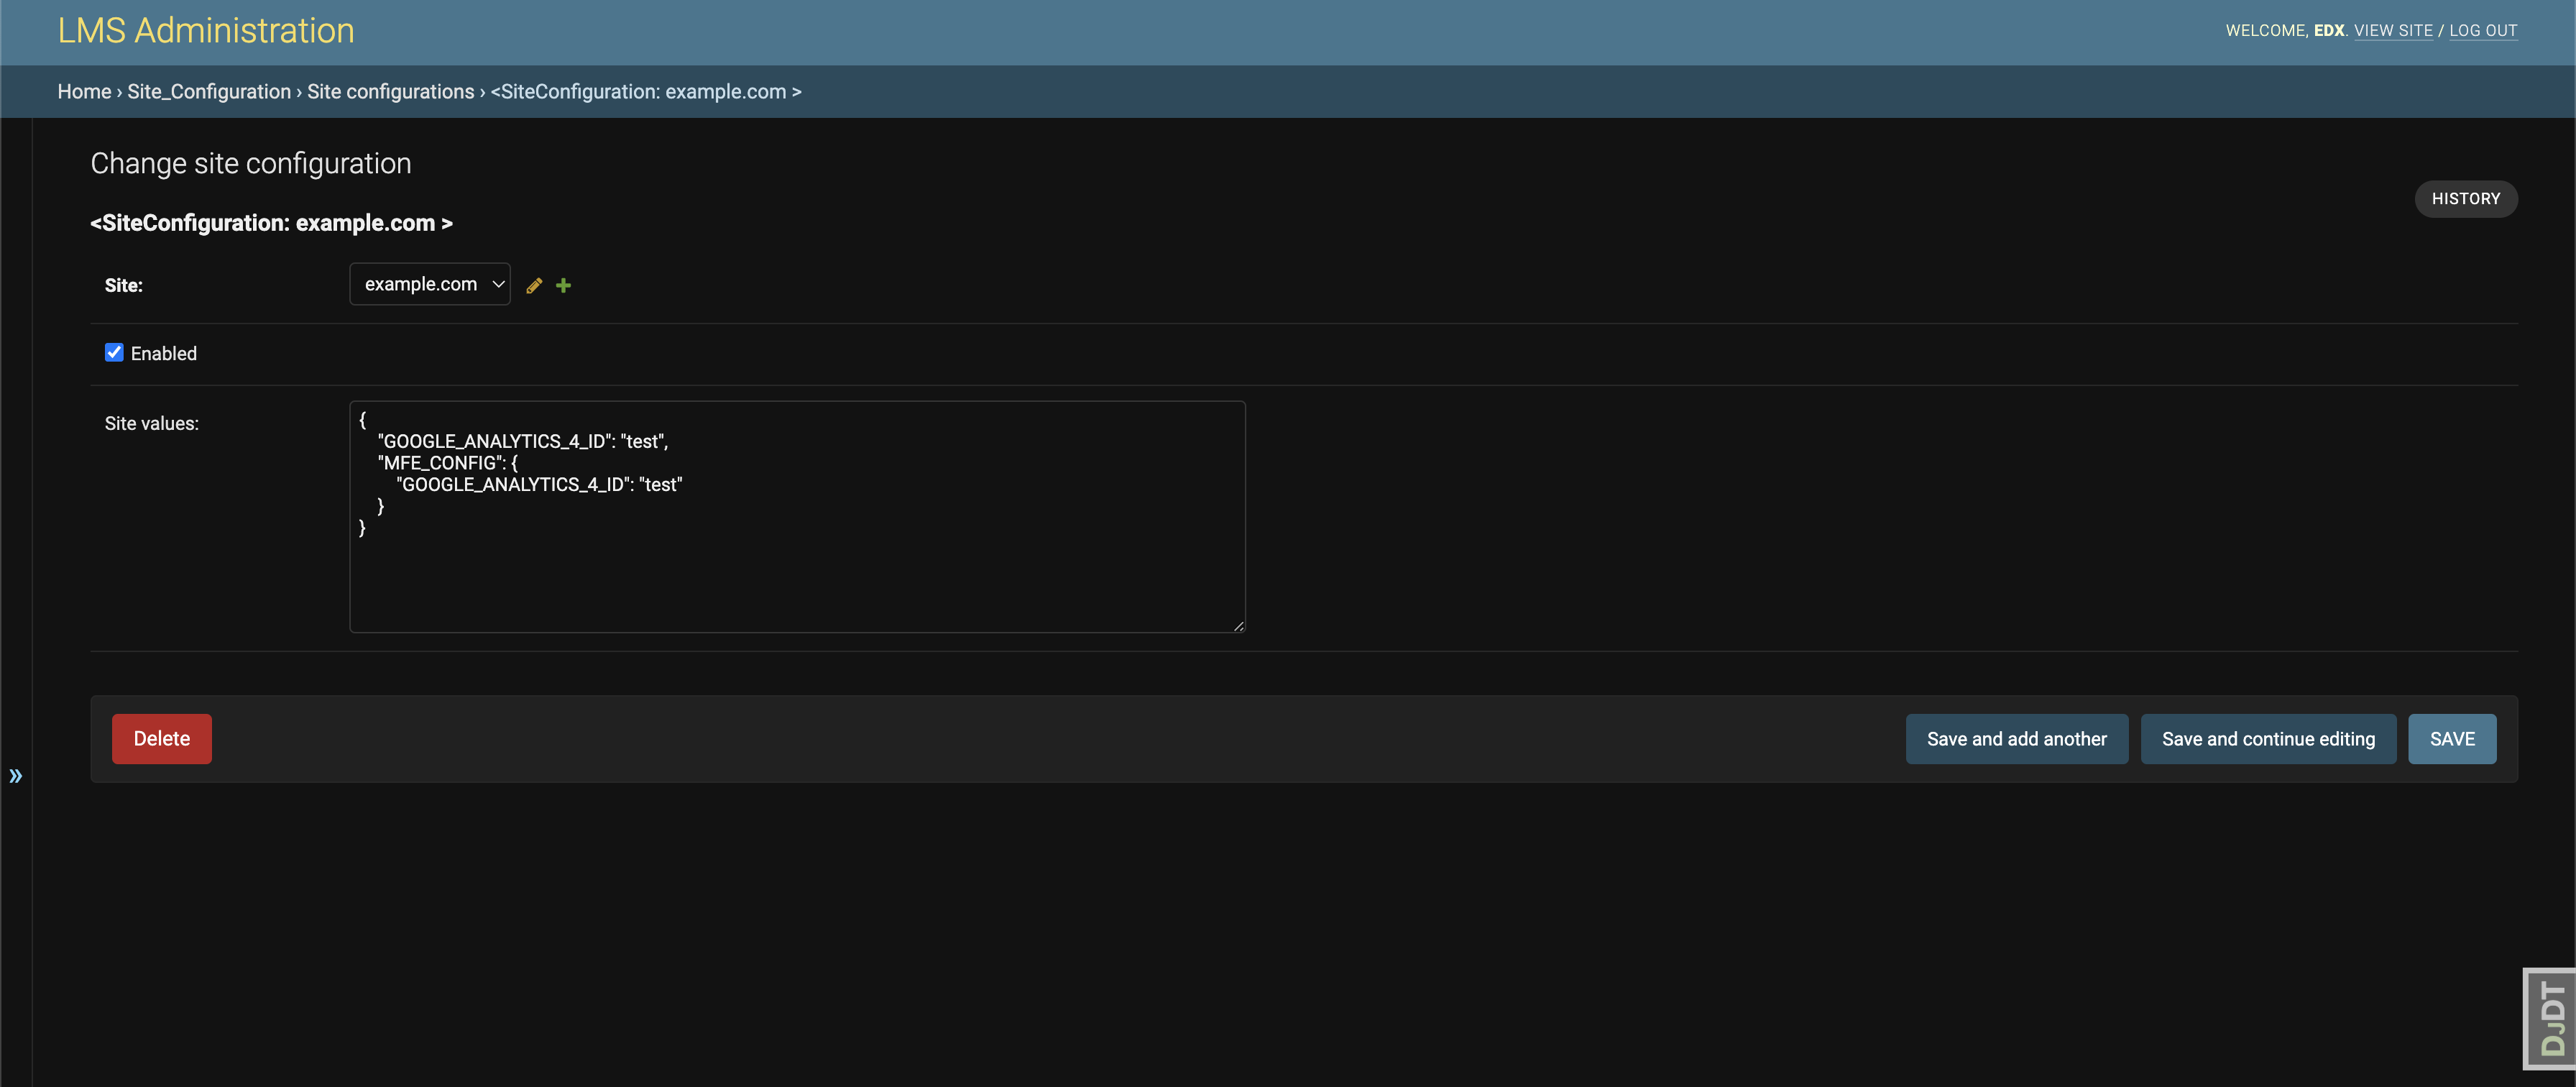 A screenshot of the LMS Django Admin interface showing where to place the configuration snippet.